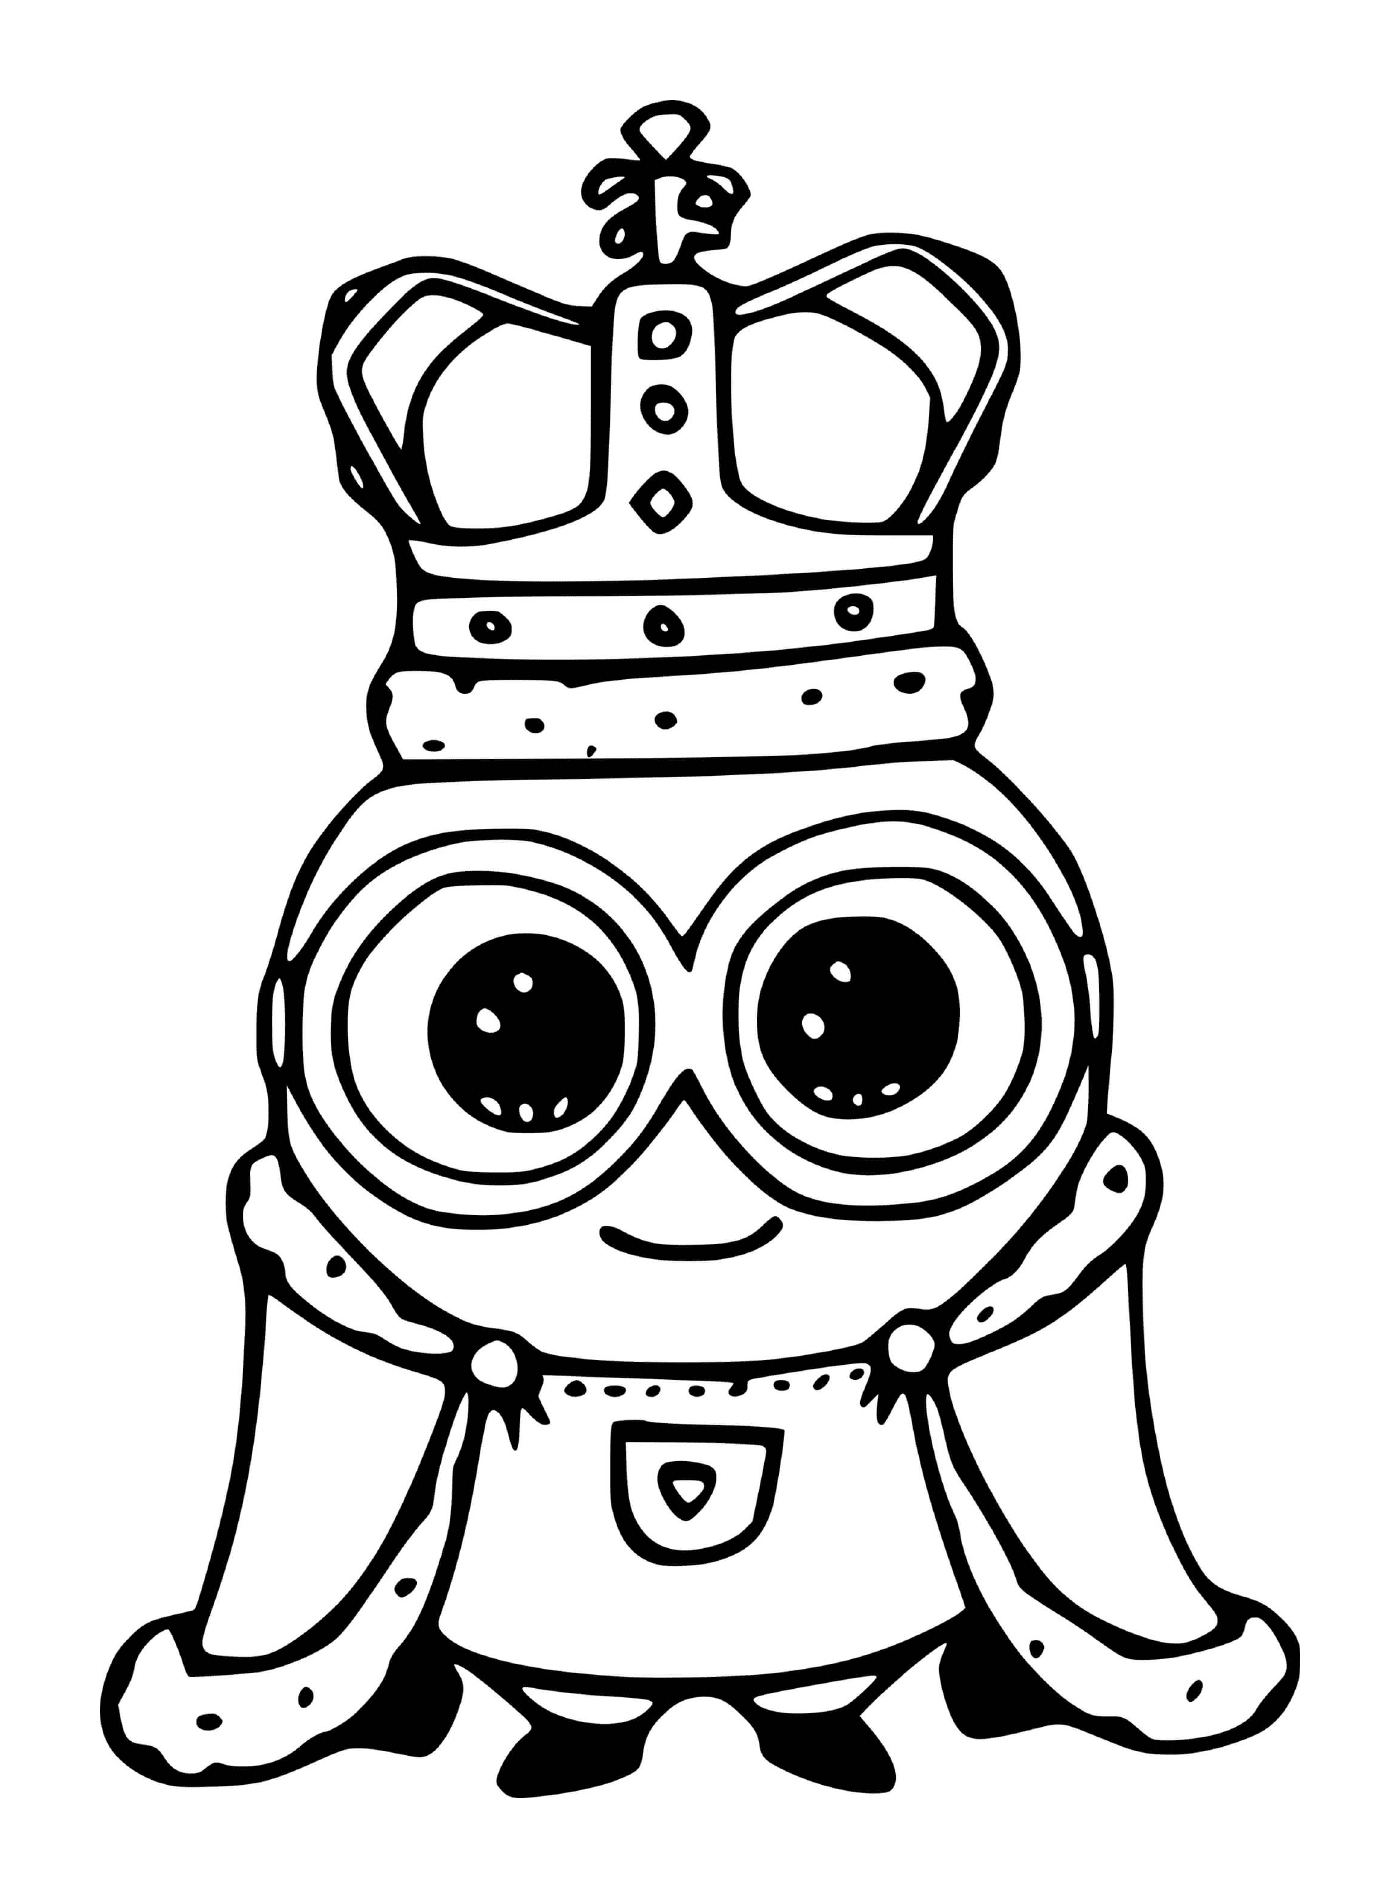  Minion with a crown 